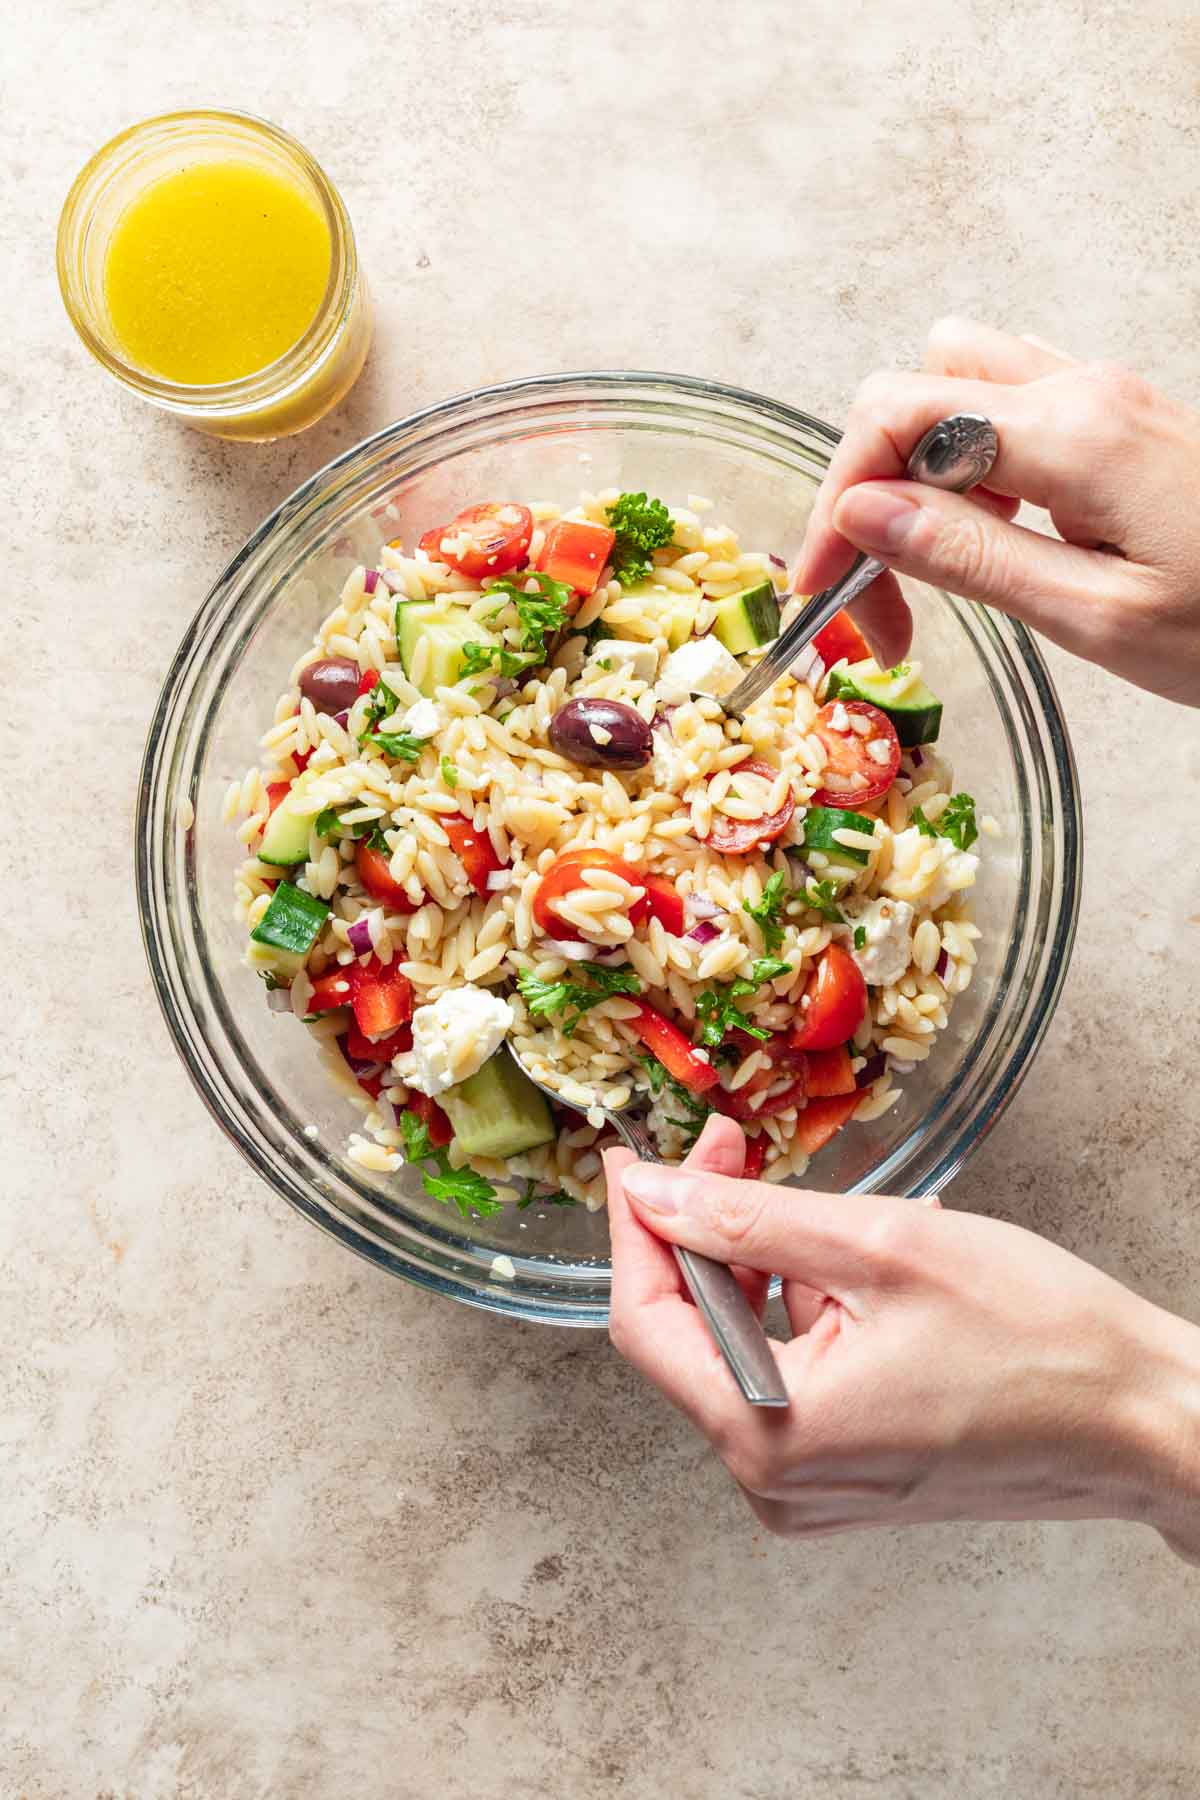 Orzo salad being tossed together in a glass bowl with a jar of lemon vinaigrette on the side.